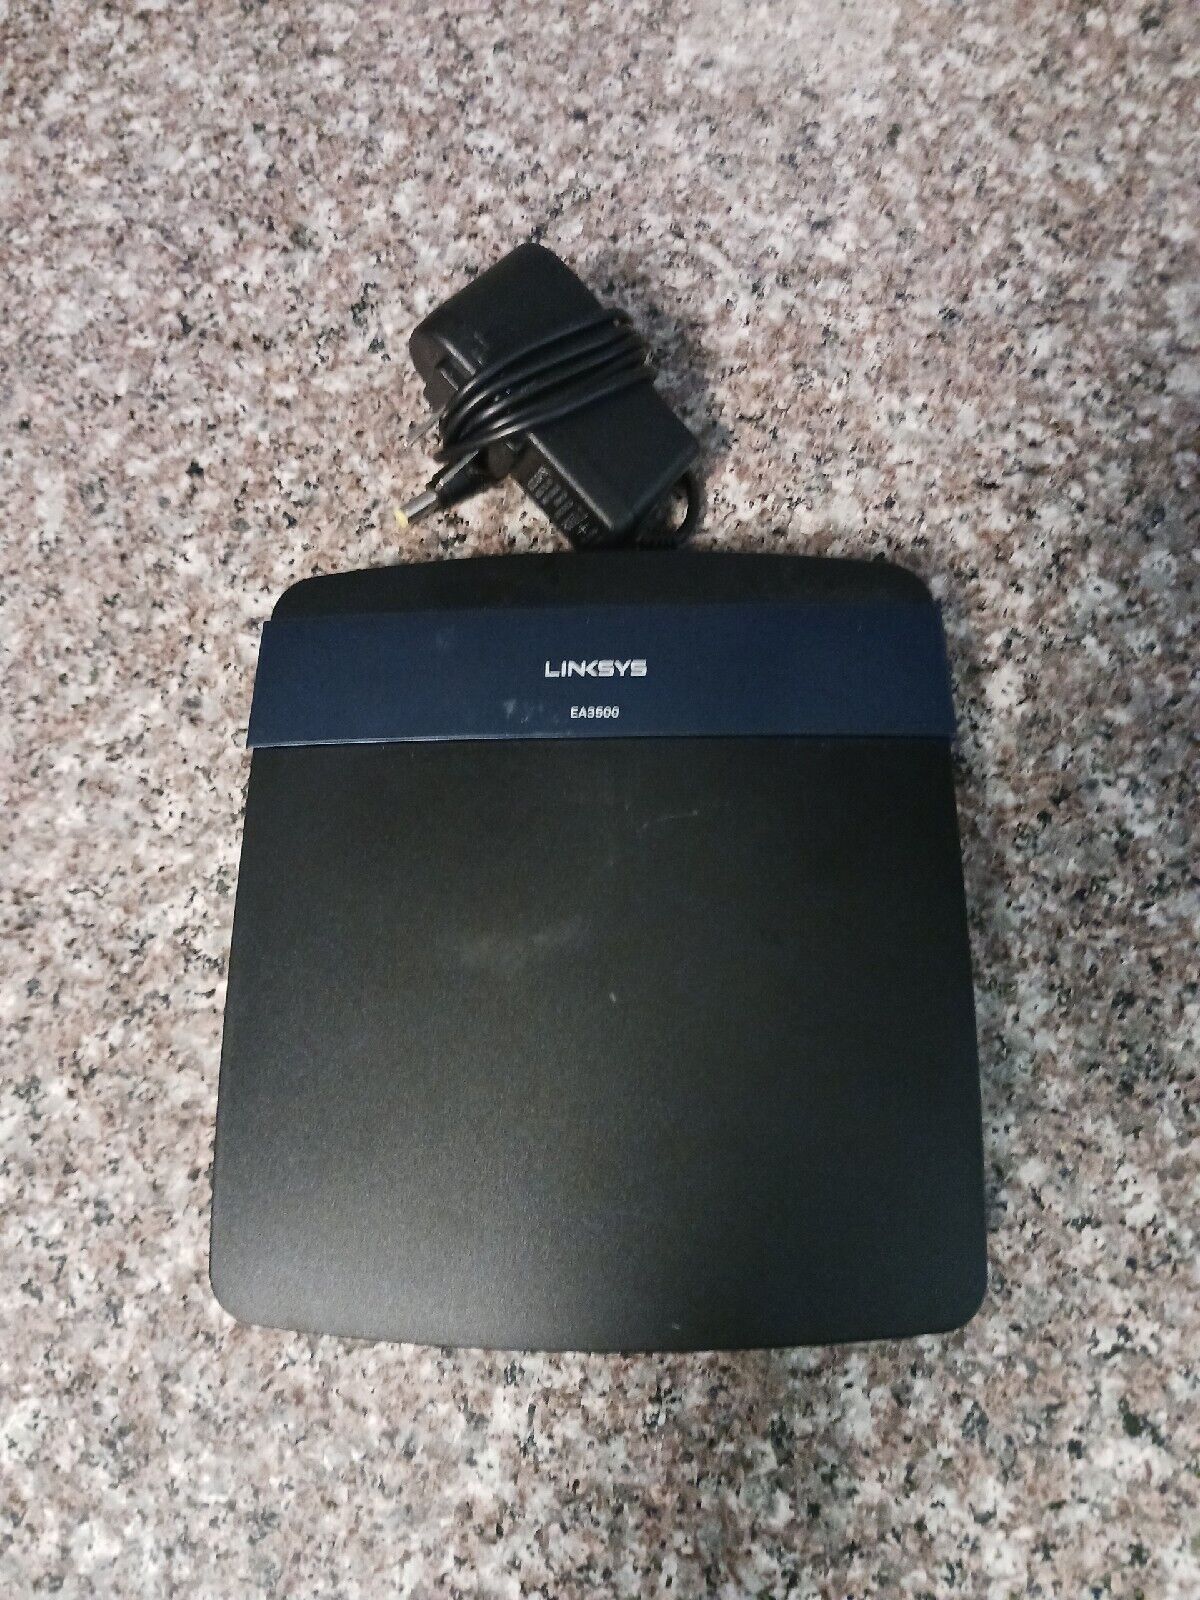 CISCO Linksys Smart Router EA3500 WiFi Preowned 